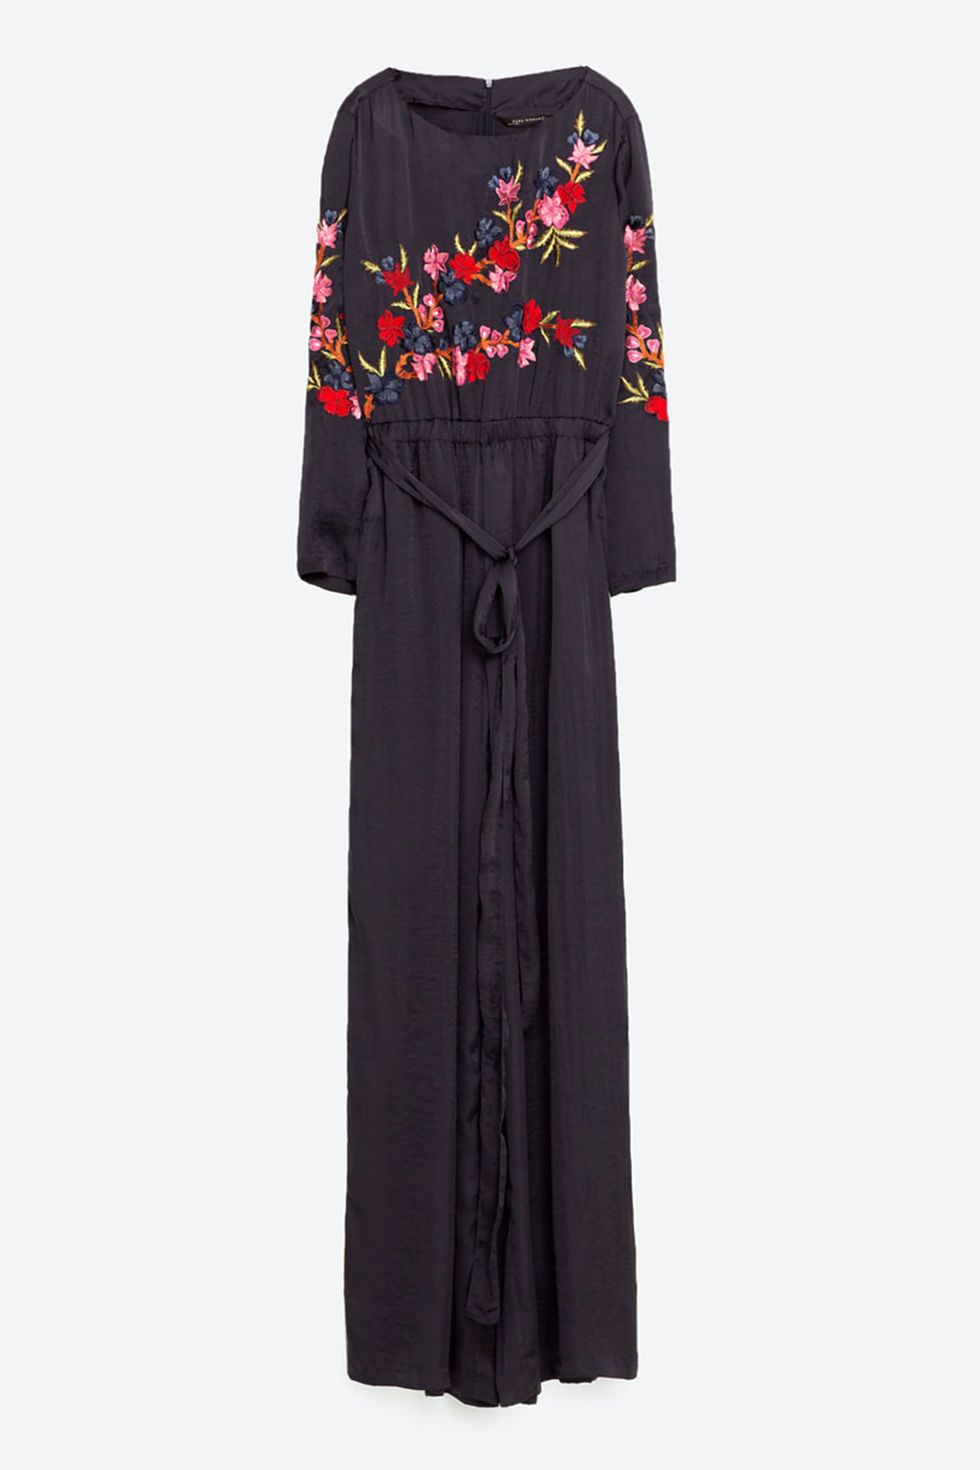 What to wear to a winter wedding. Zara embroidered autumn floral jumpsuit. 